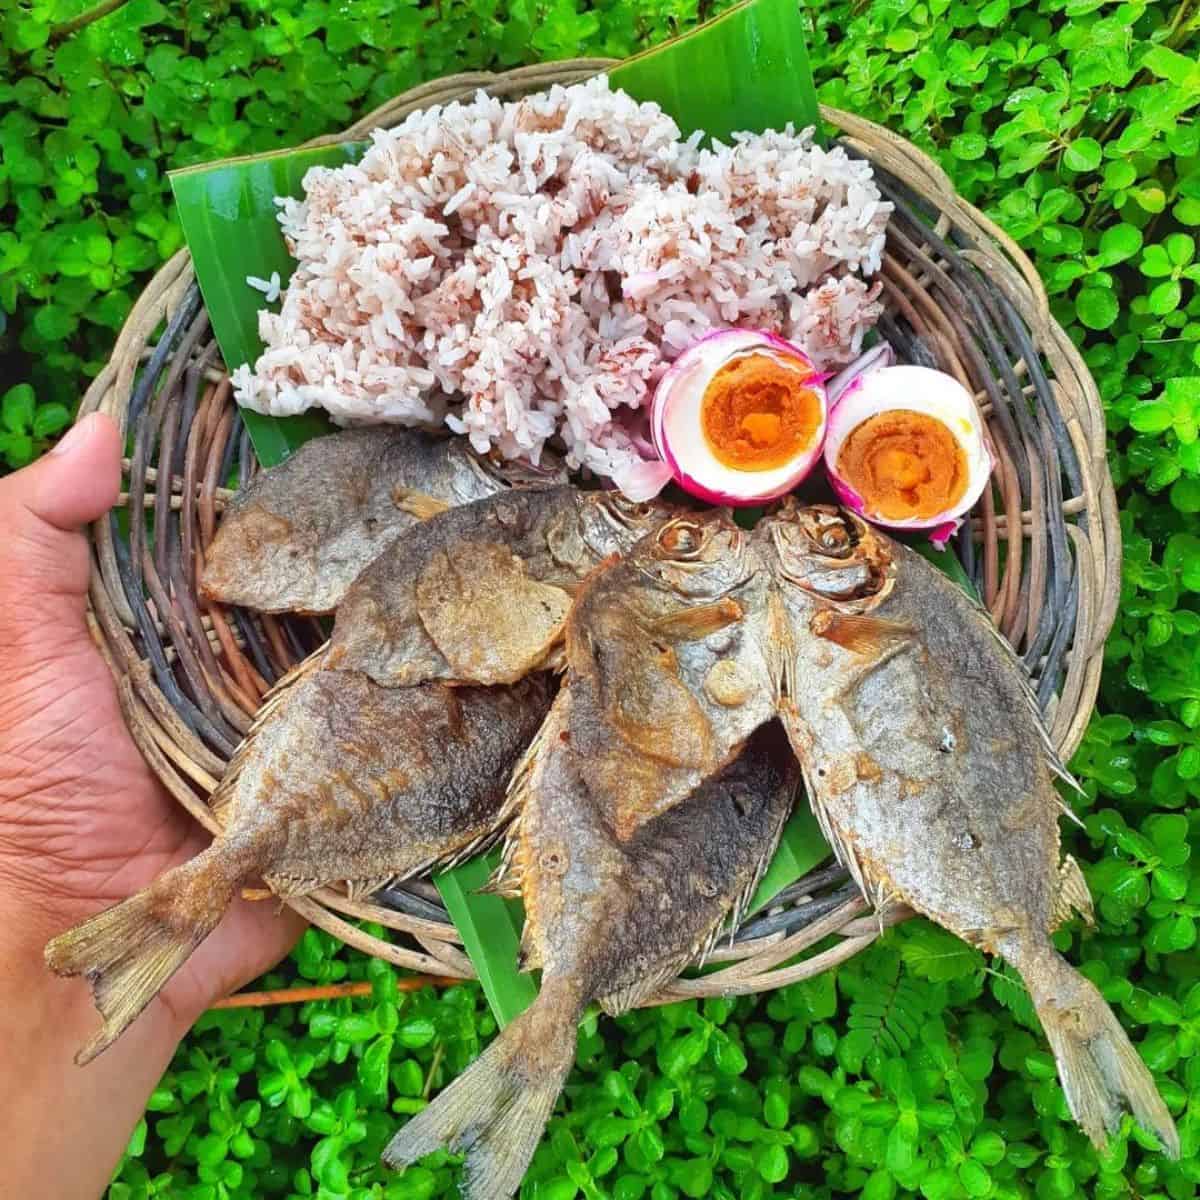 Mouthwatering breakfast plate with fried fish, red rice, and salted egg